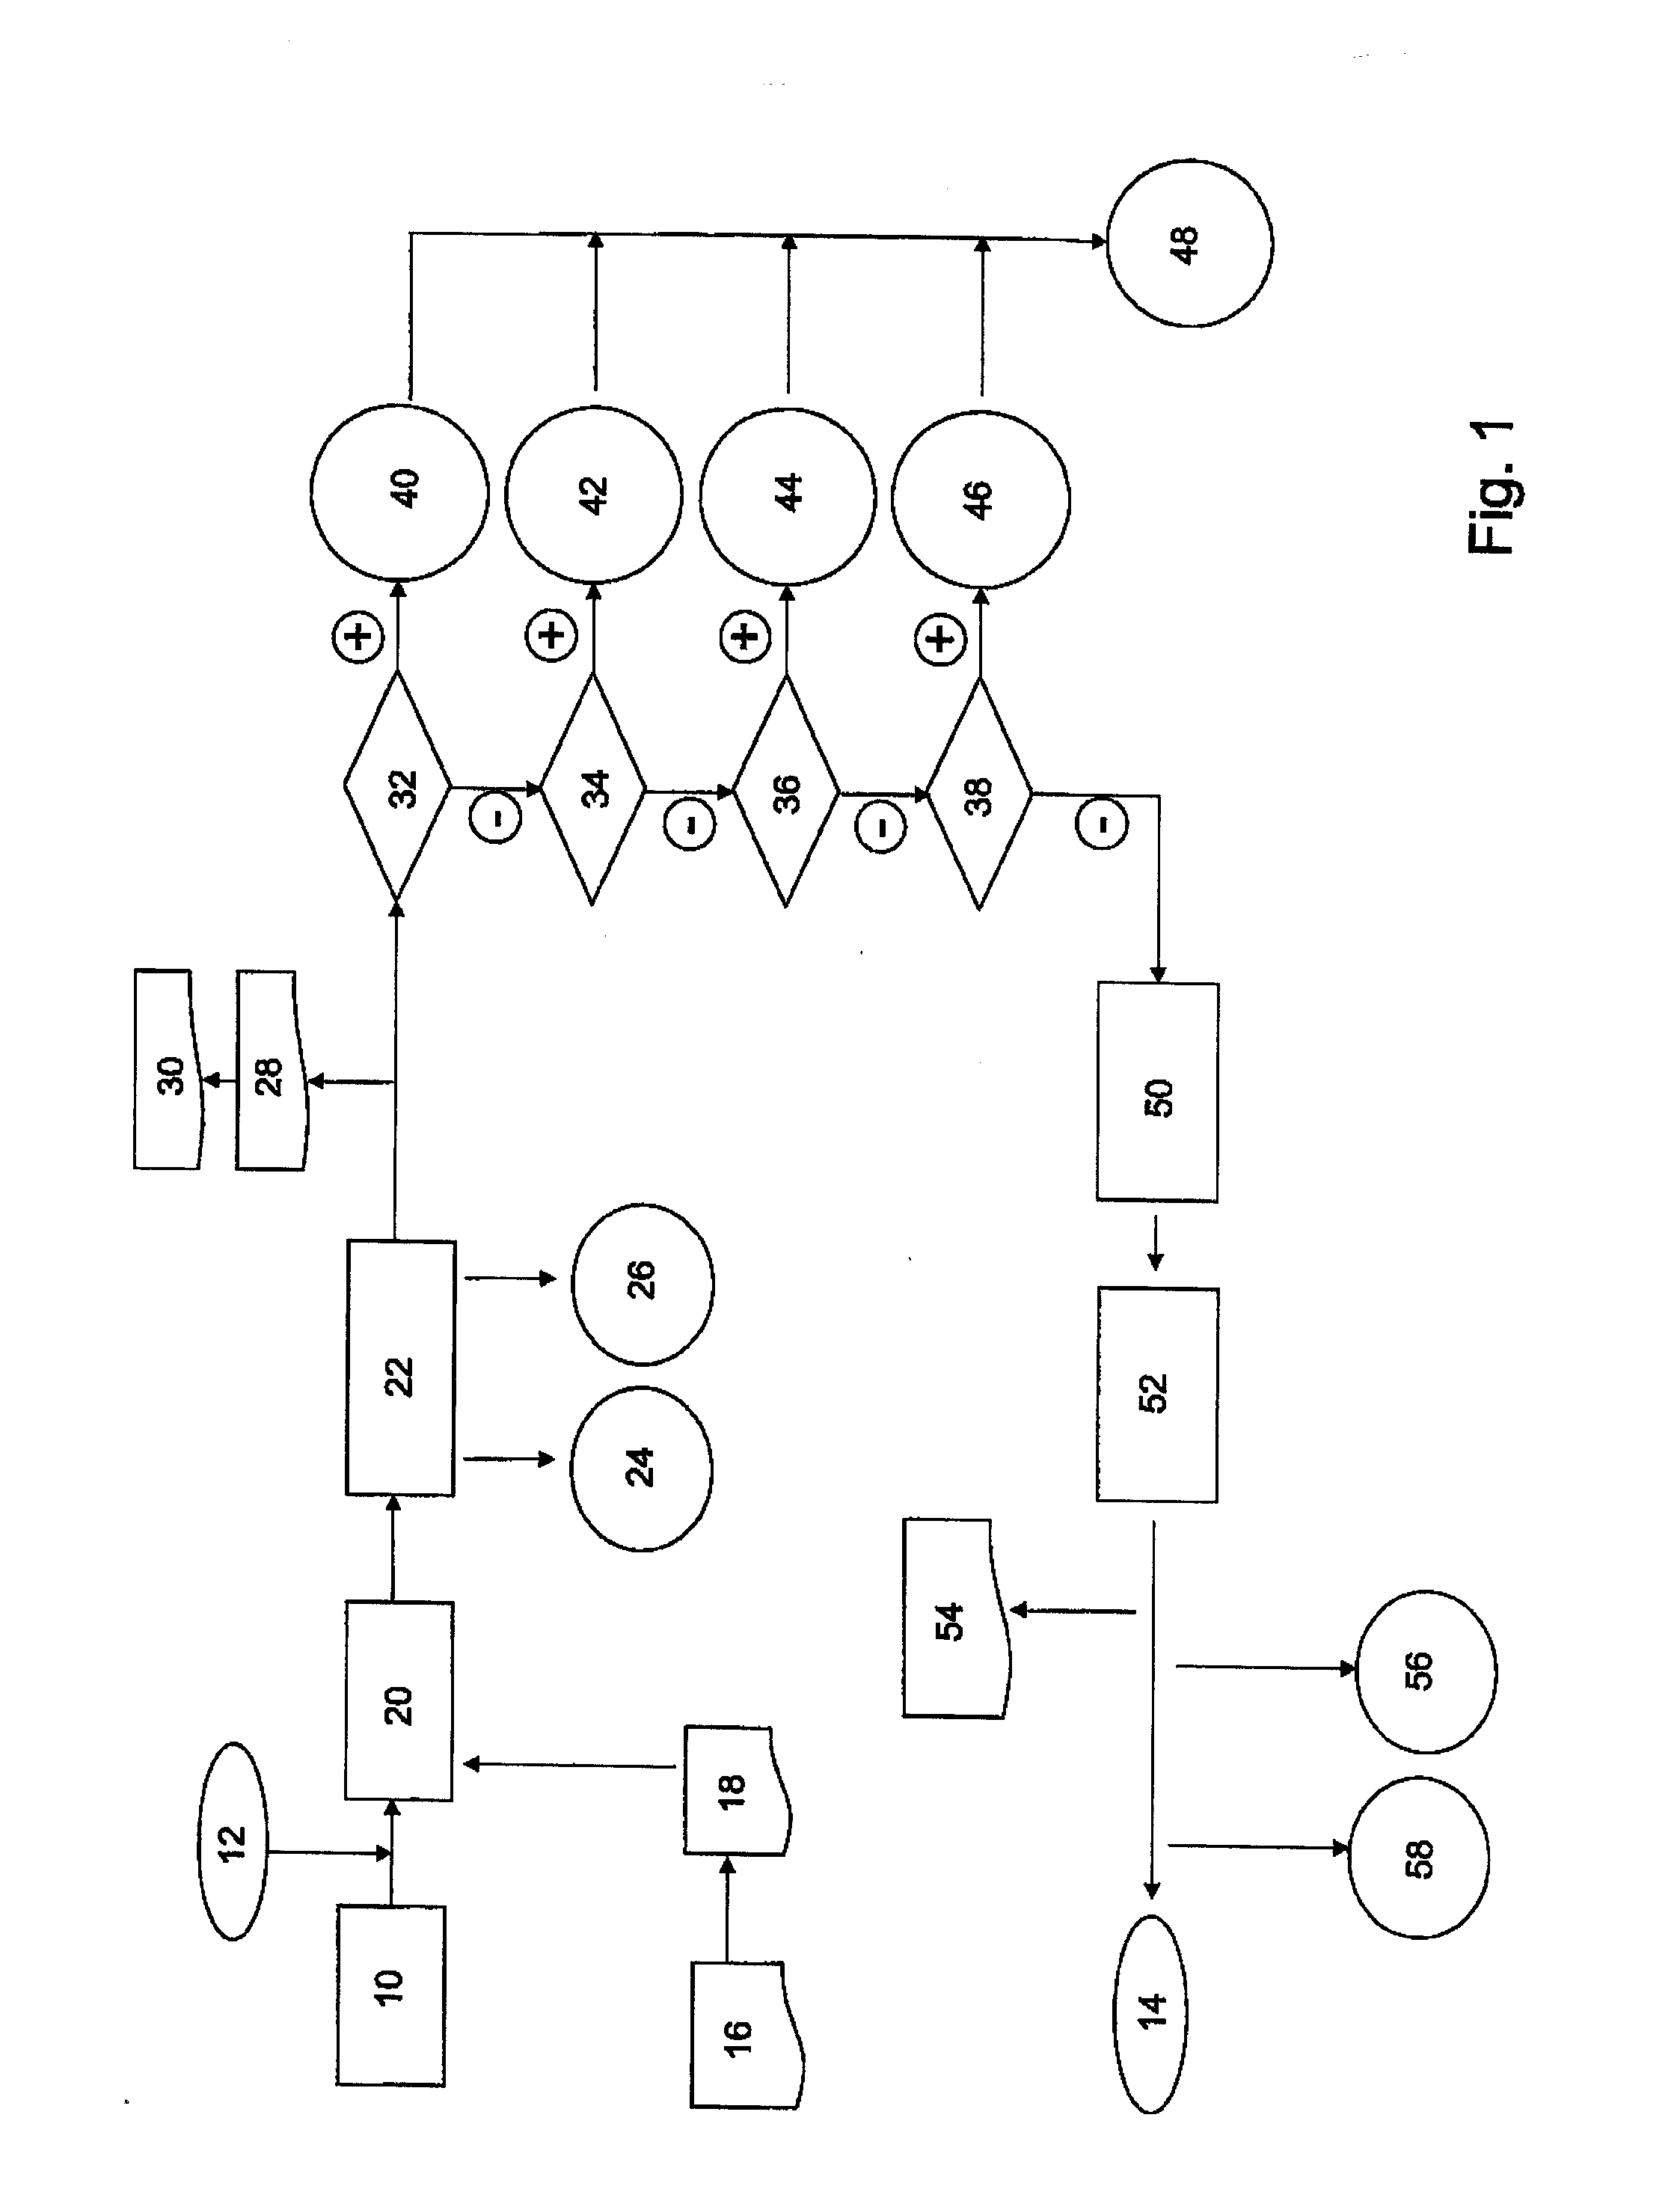 Method and system for automatically processing and evaluating medical data